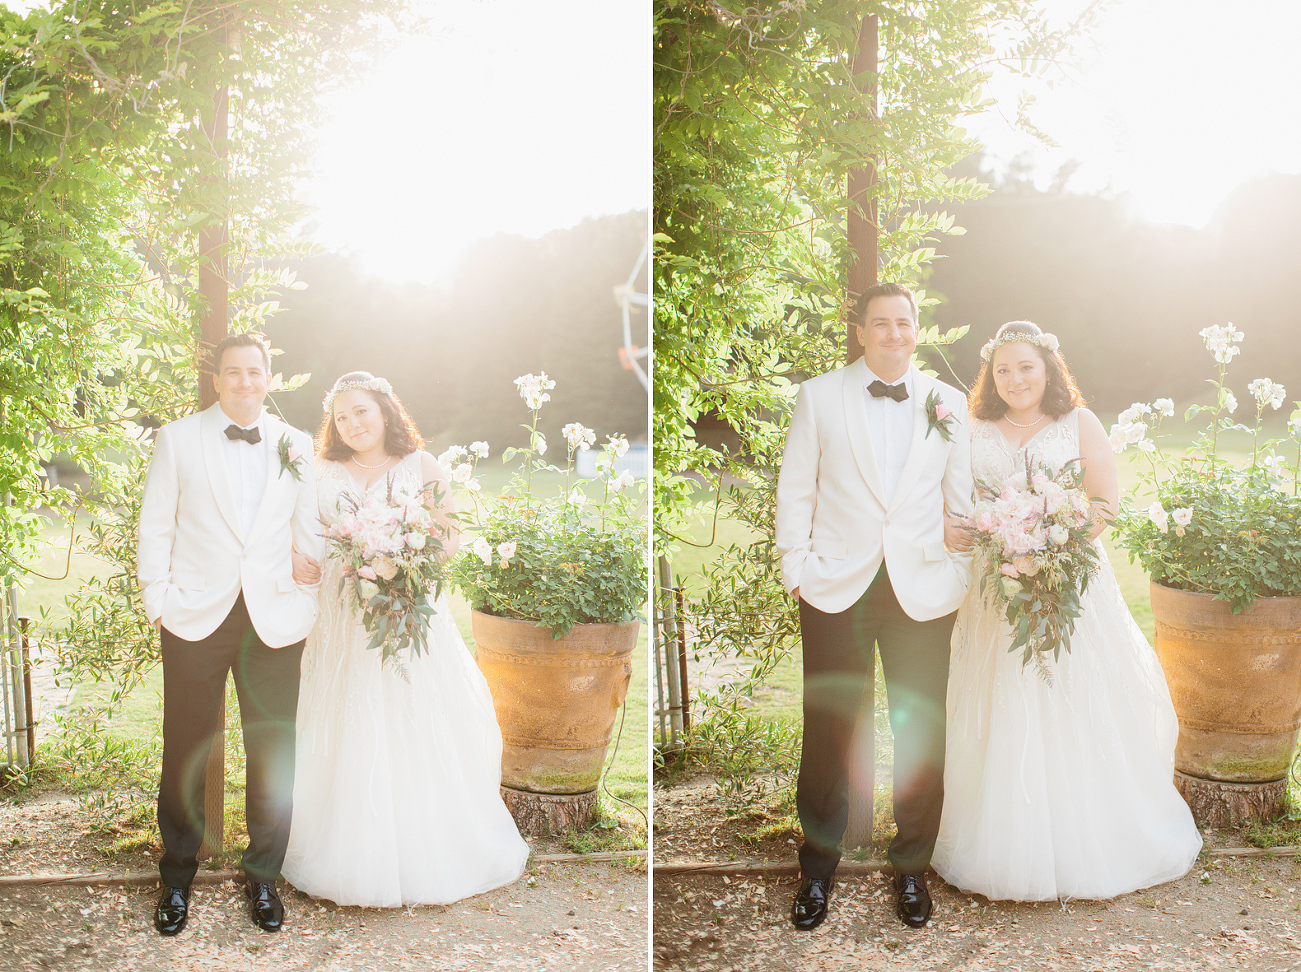 Sun filled photos of the bride and groom. 